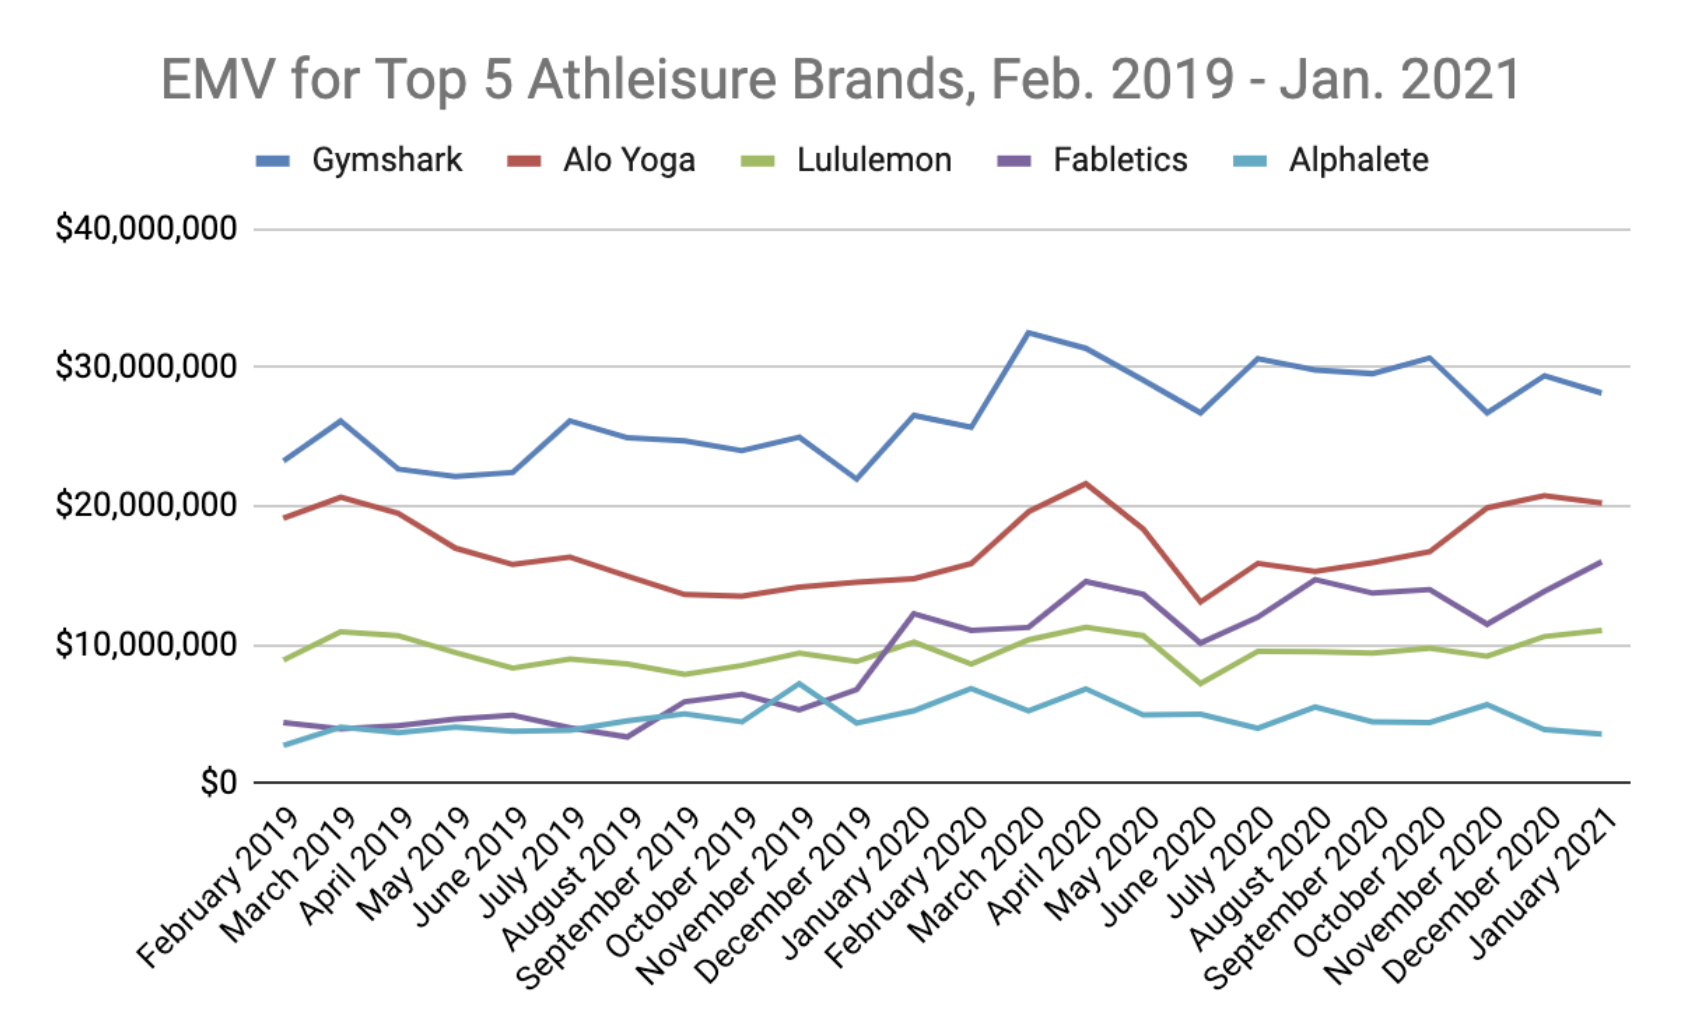 A line graph displaying monthly EMV for the 5 top athleisure brands from February 2019 to January 2021. 